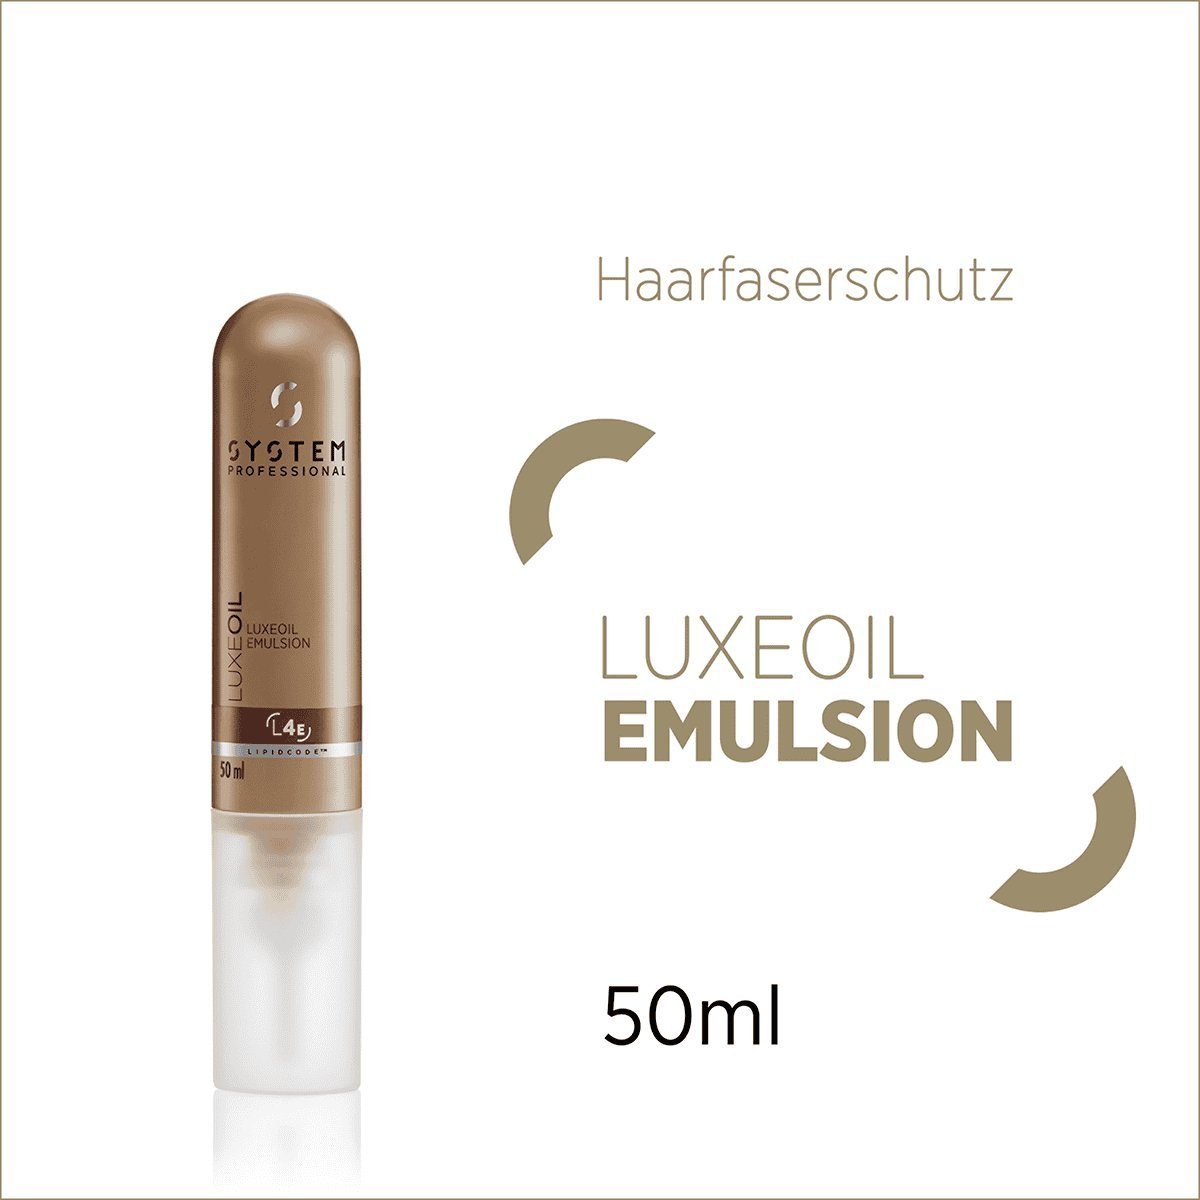 System Professional Haarkur System Professional L4e Emulsion Luxeoil